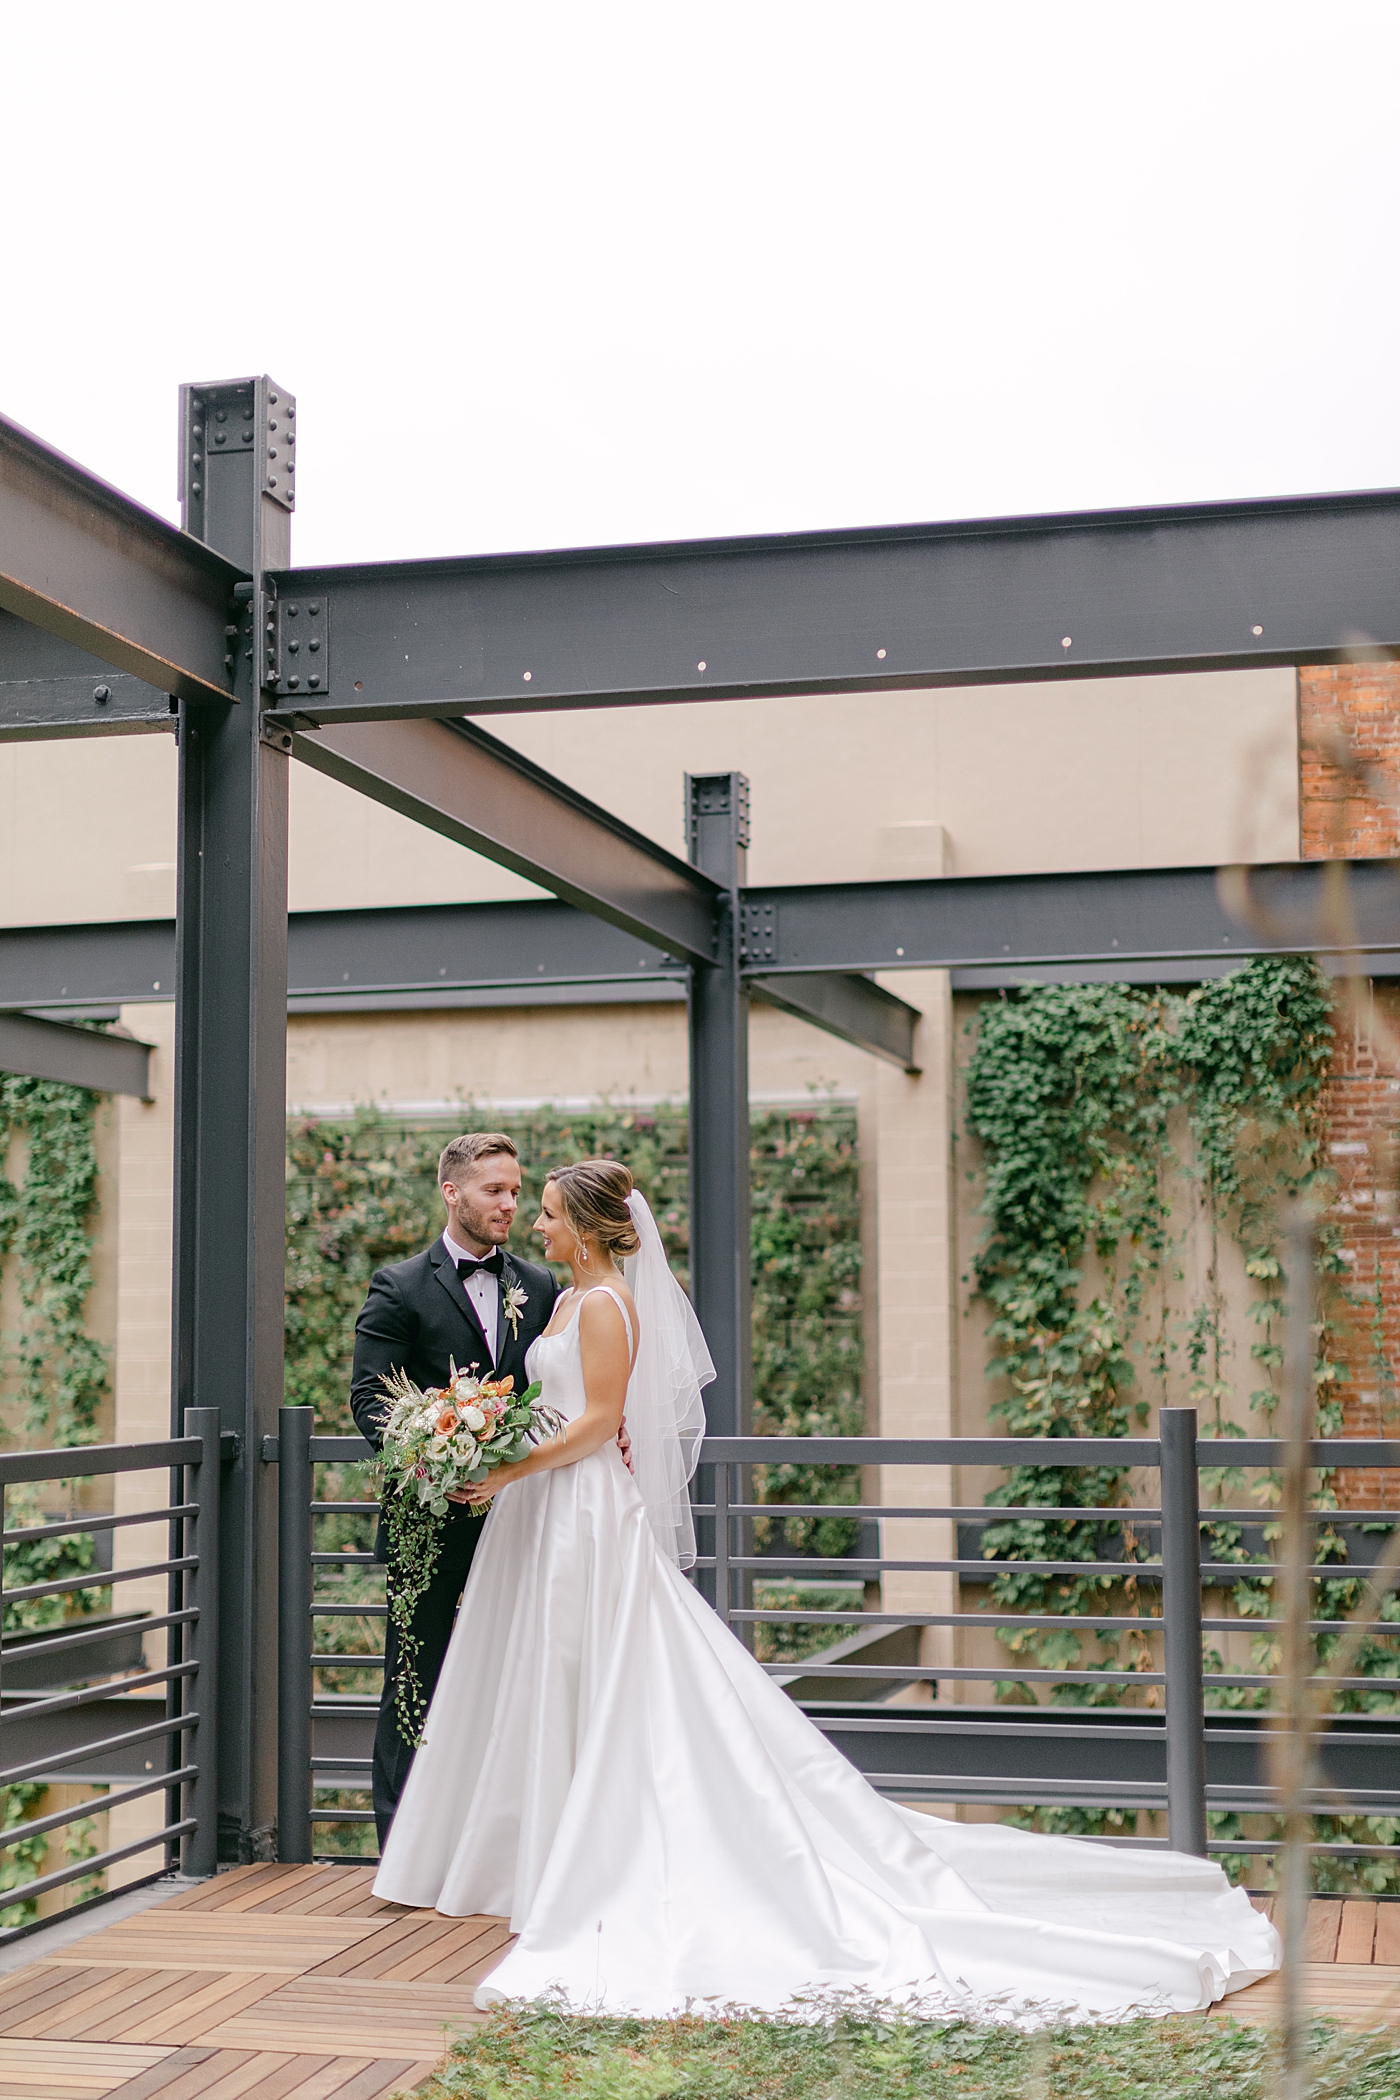 Bride and groom kissing on a rooftop | Excelsior PA Wedding Photography by Hope Helmuth Photography